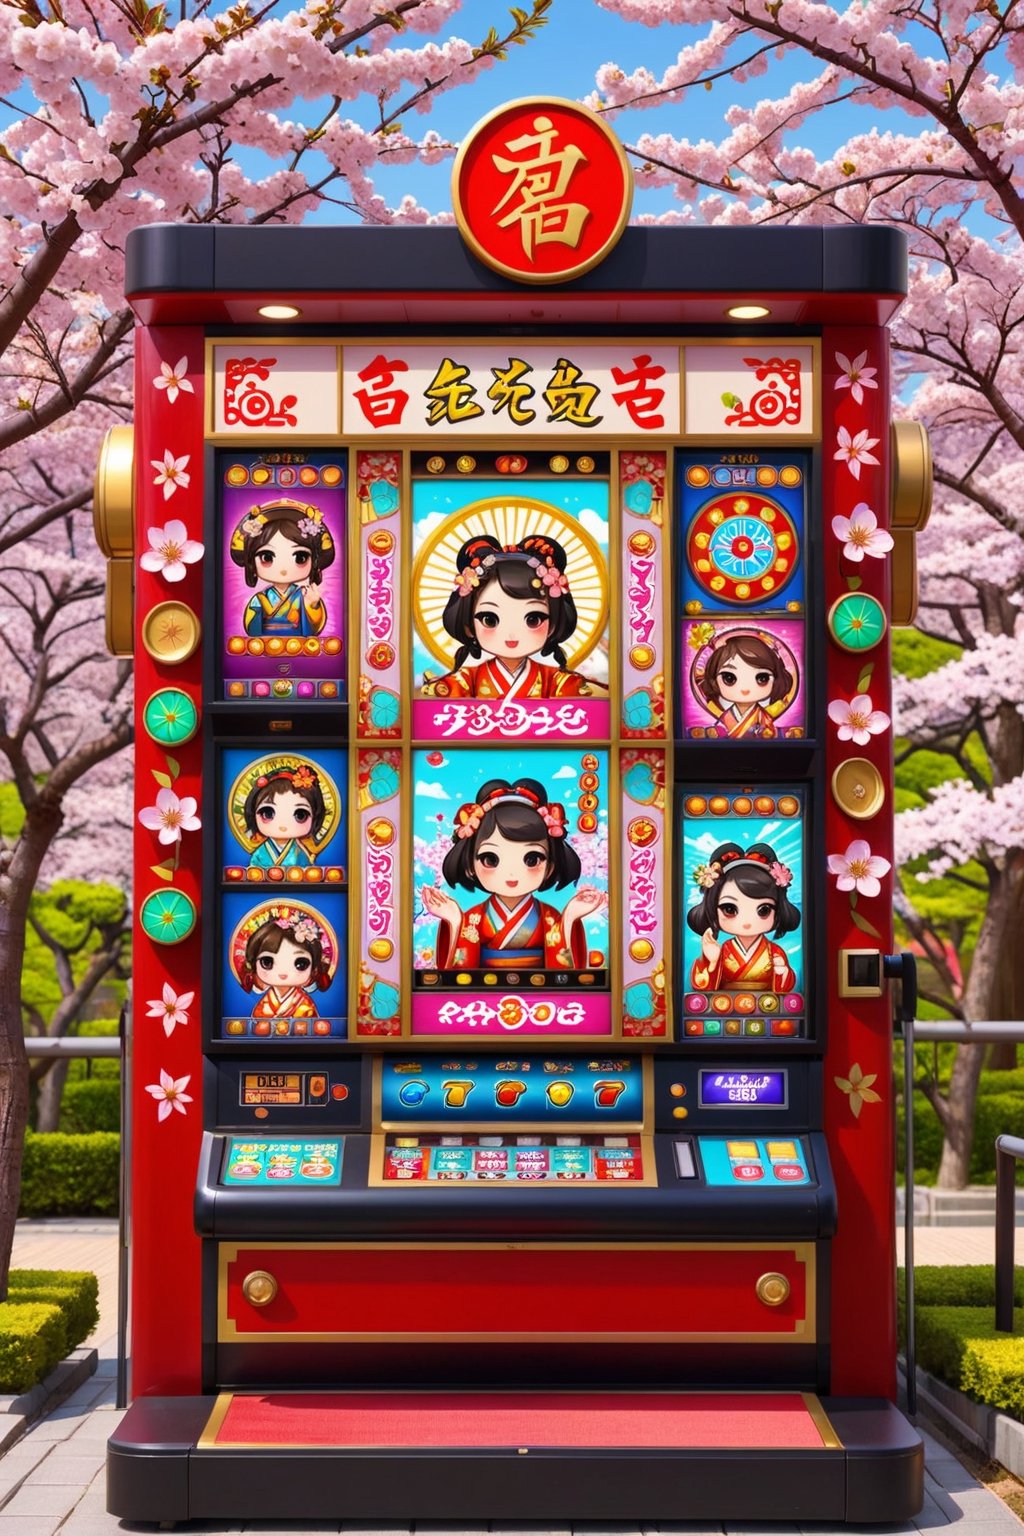 Japanese cultural dance-inspired transition screen in a cartoon-style aesthetic, bursting with vibrant colors, playful animations, and charming graphics related to the theme of the slot machine game. Cartoon characters dressed in traditional Japanese attire perform lively dance moves, surrounded by swirling patterns of cherry blossoms and whimsical motifs. As the dance unfolds, cartoon icons representing bonus features or special symbols pop up, adding a sense of anticipation and fun for players. The transition exudes the charm and energy of Japanese culture in a playful and captivating manner, enhancing the gaming experience with its delightful animation and design.